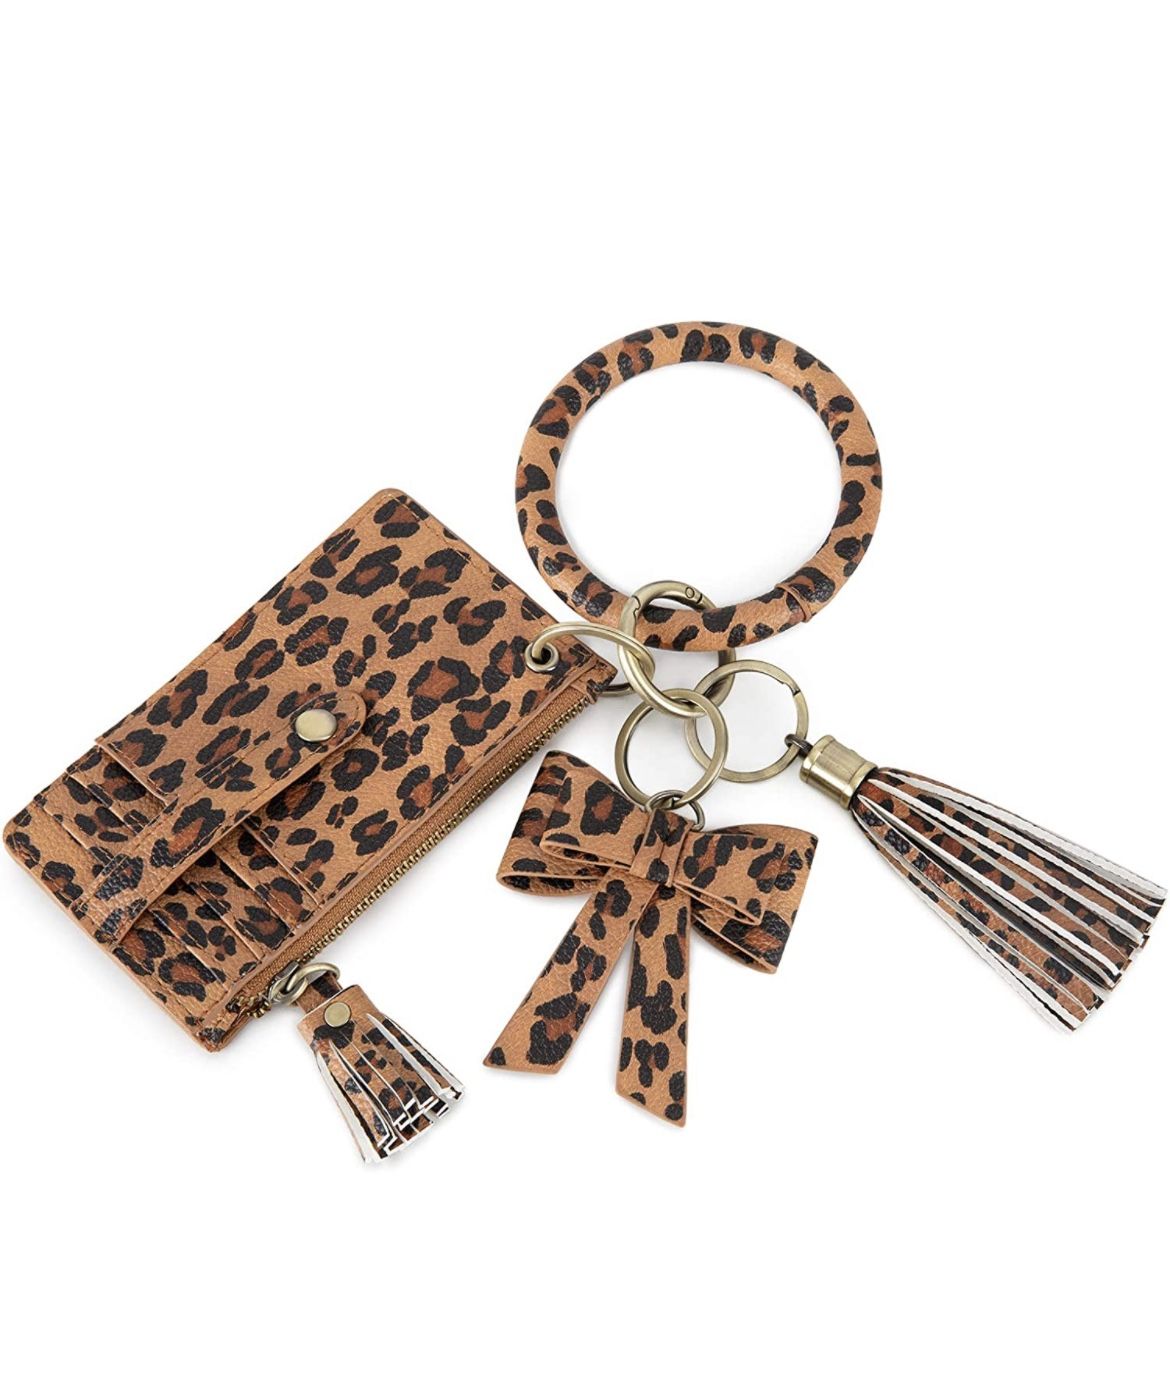 Brand New Wristlet Key Chain Ring Wallet(check My Other Listings As Well)